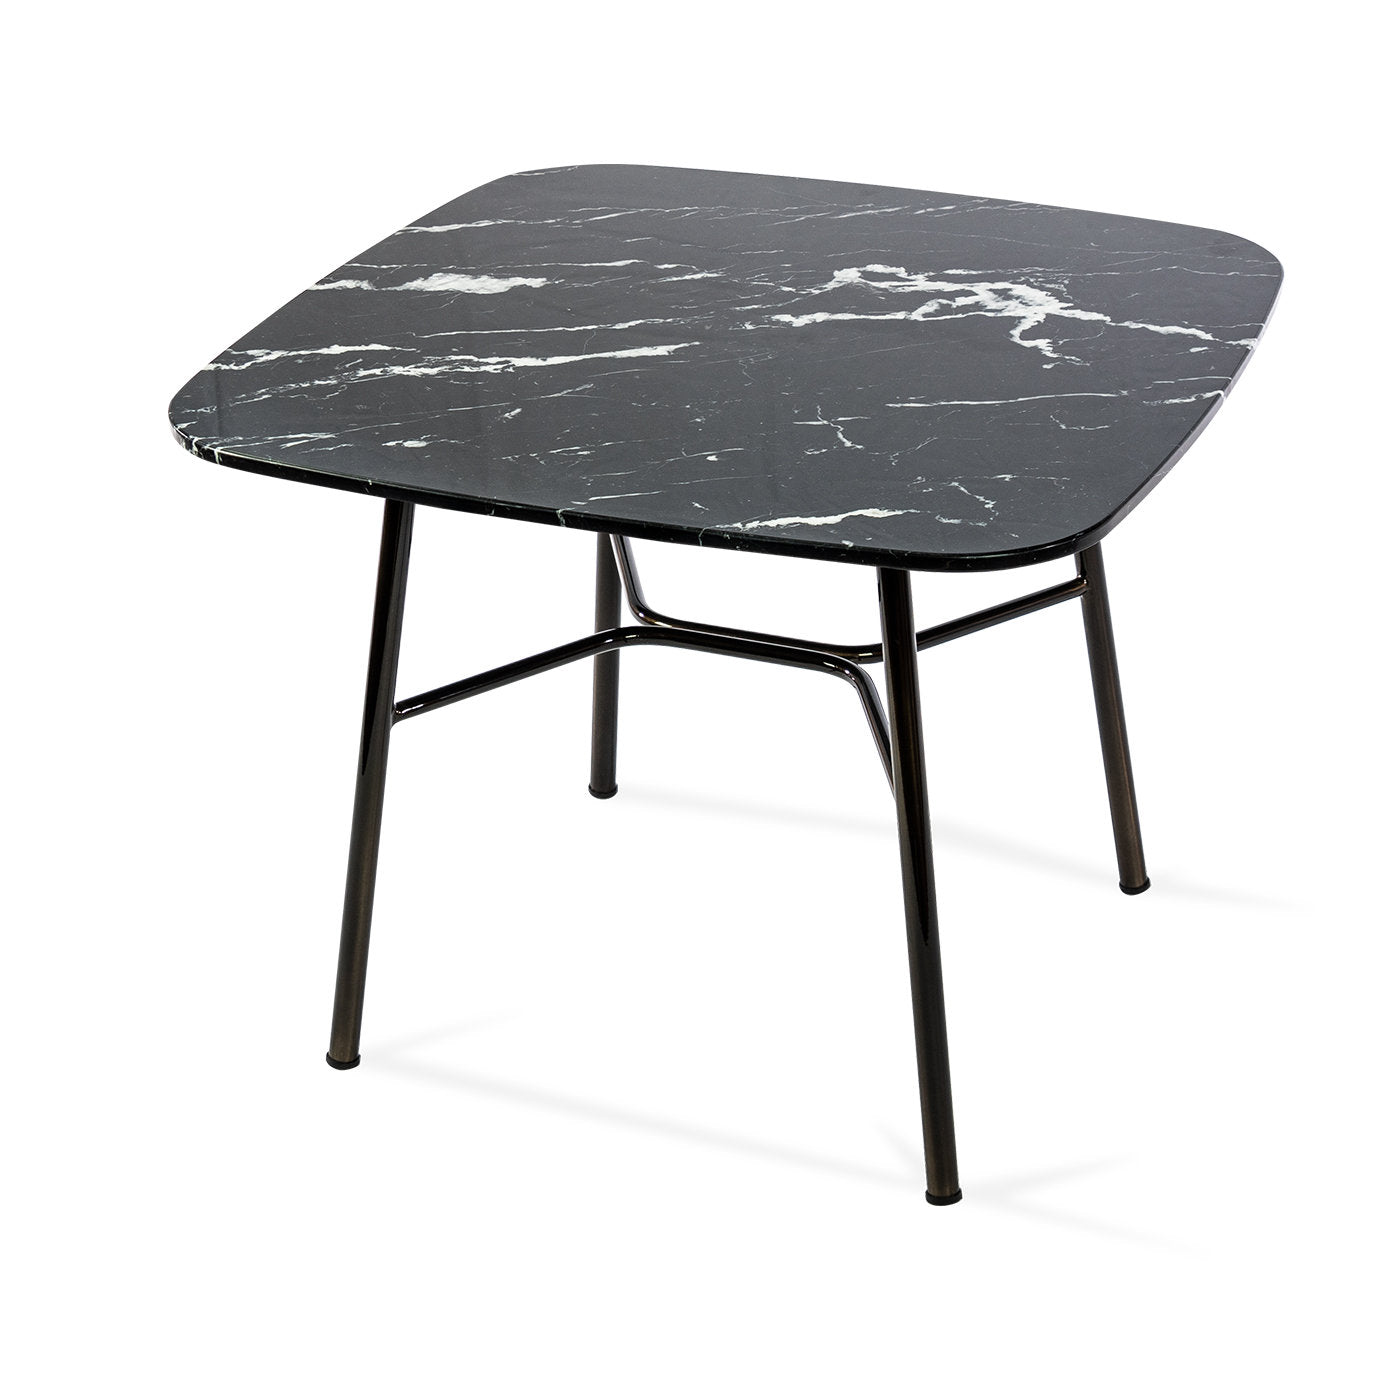 Yuki Square Side Table with Black Marquinia Top # 1 by Ep Studio - Alternative view 1